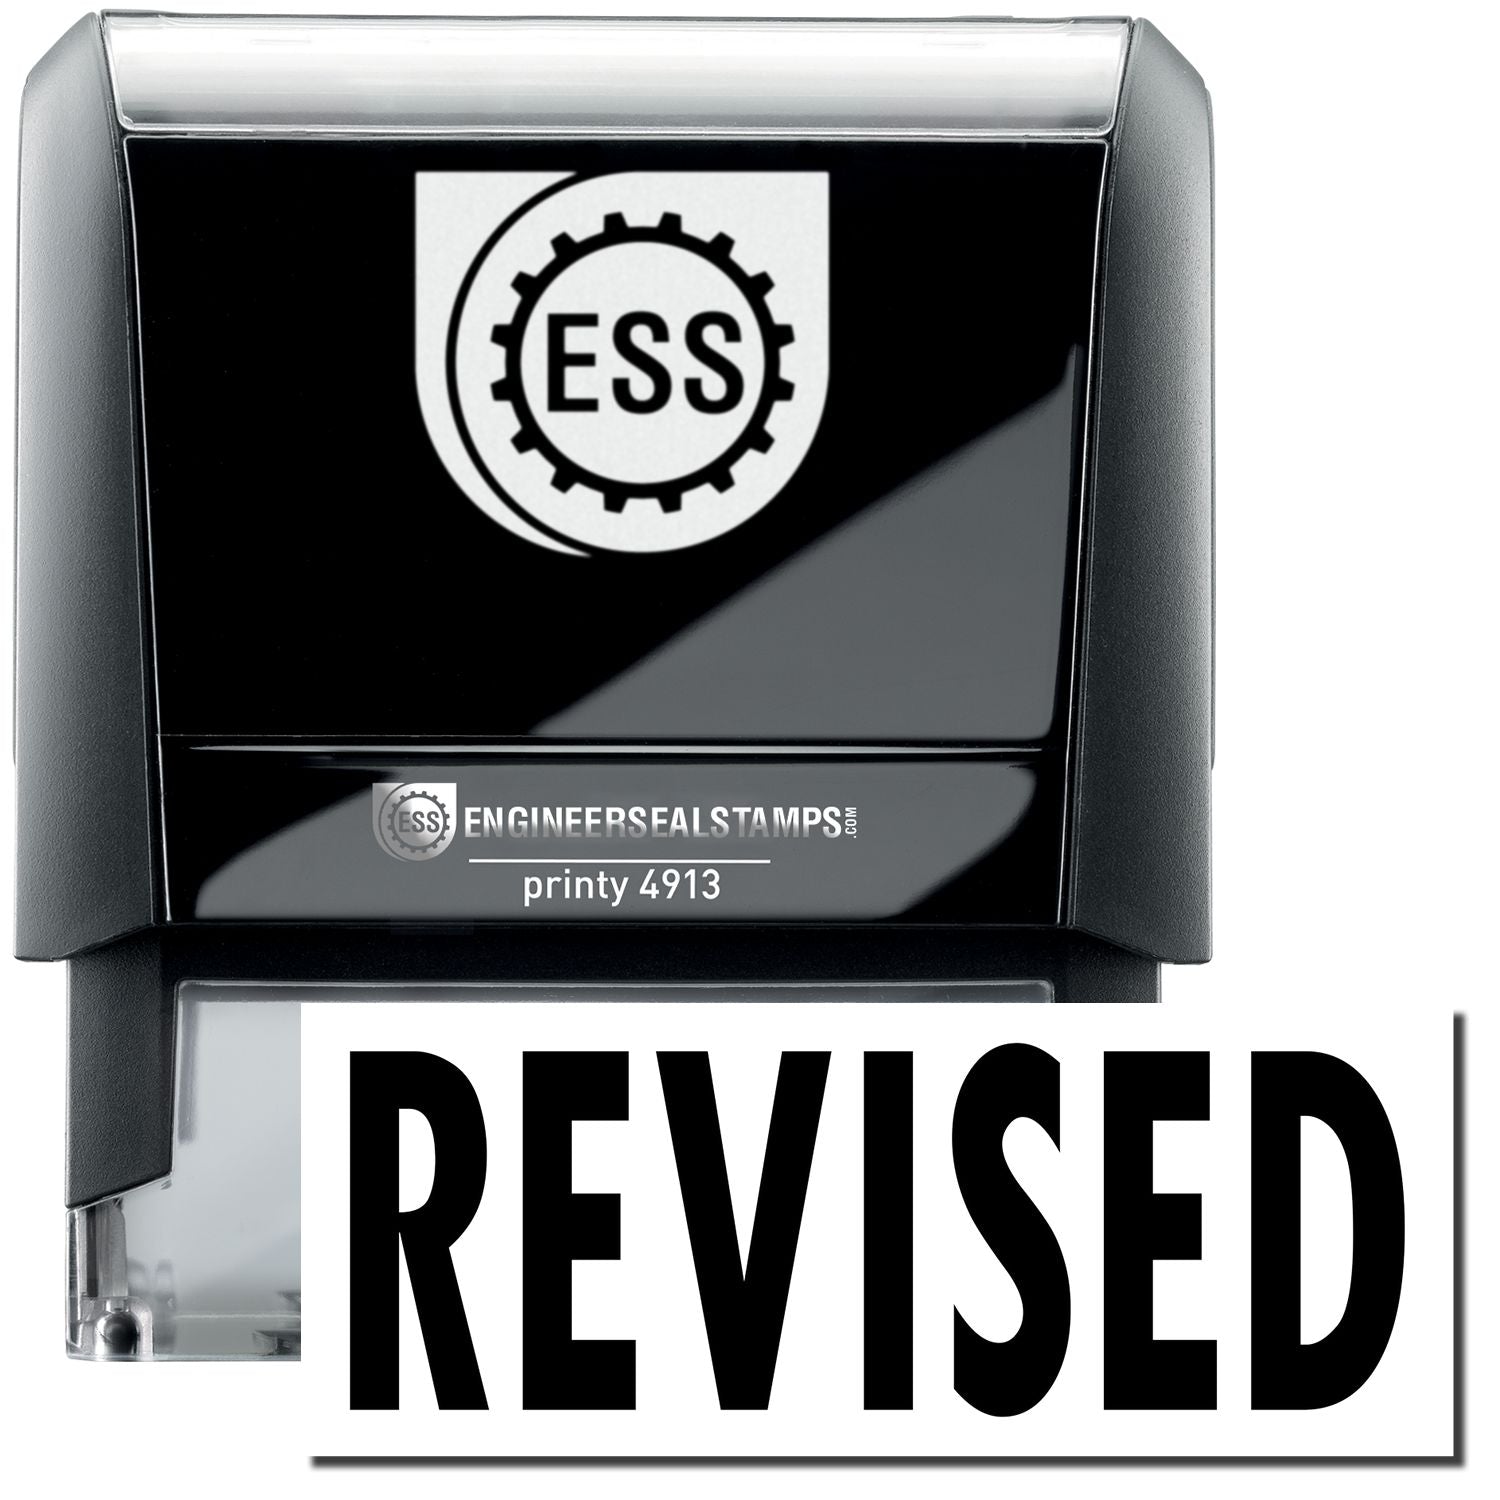 A self-inking stamp with a stamped image showing how the text "REVISED" in a large bold font is displayed by it.